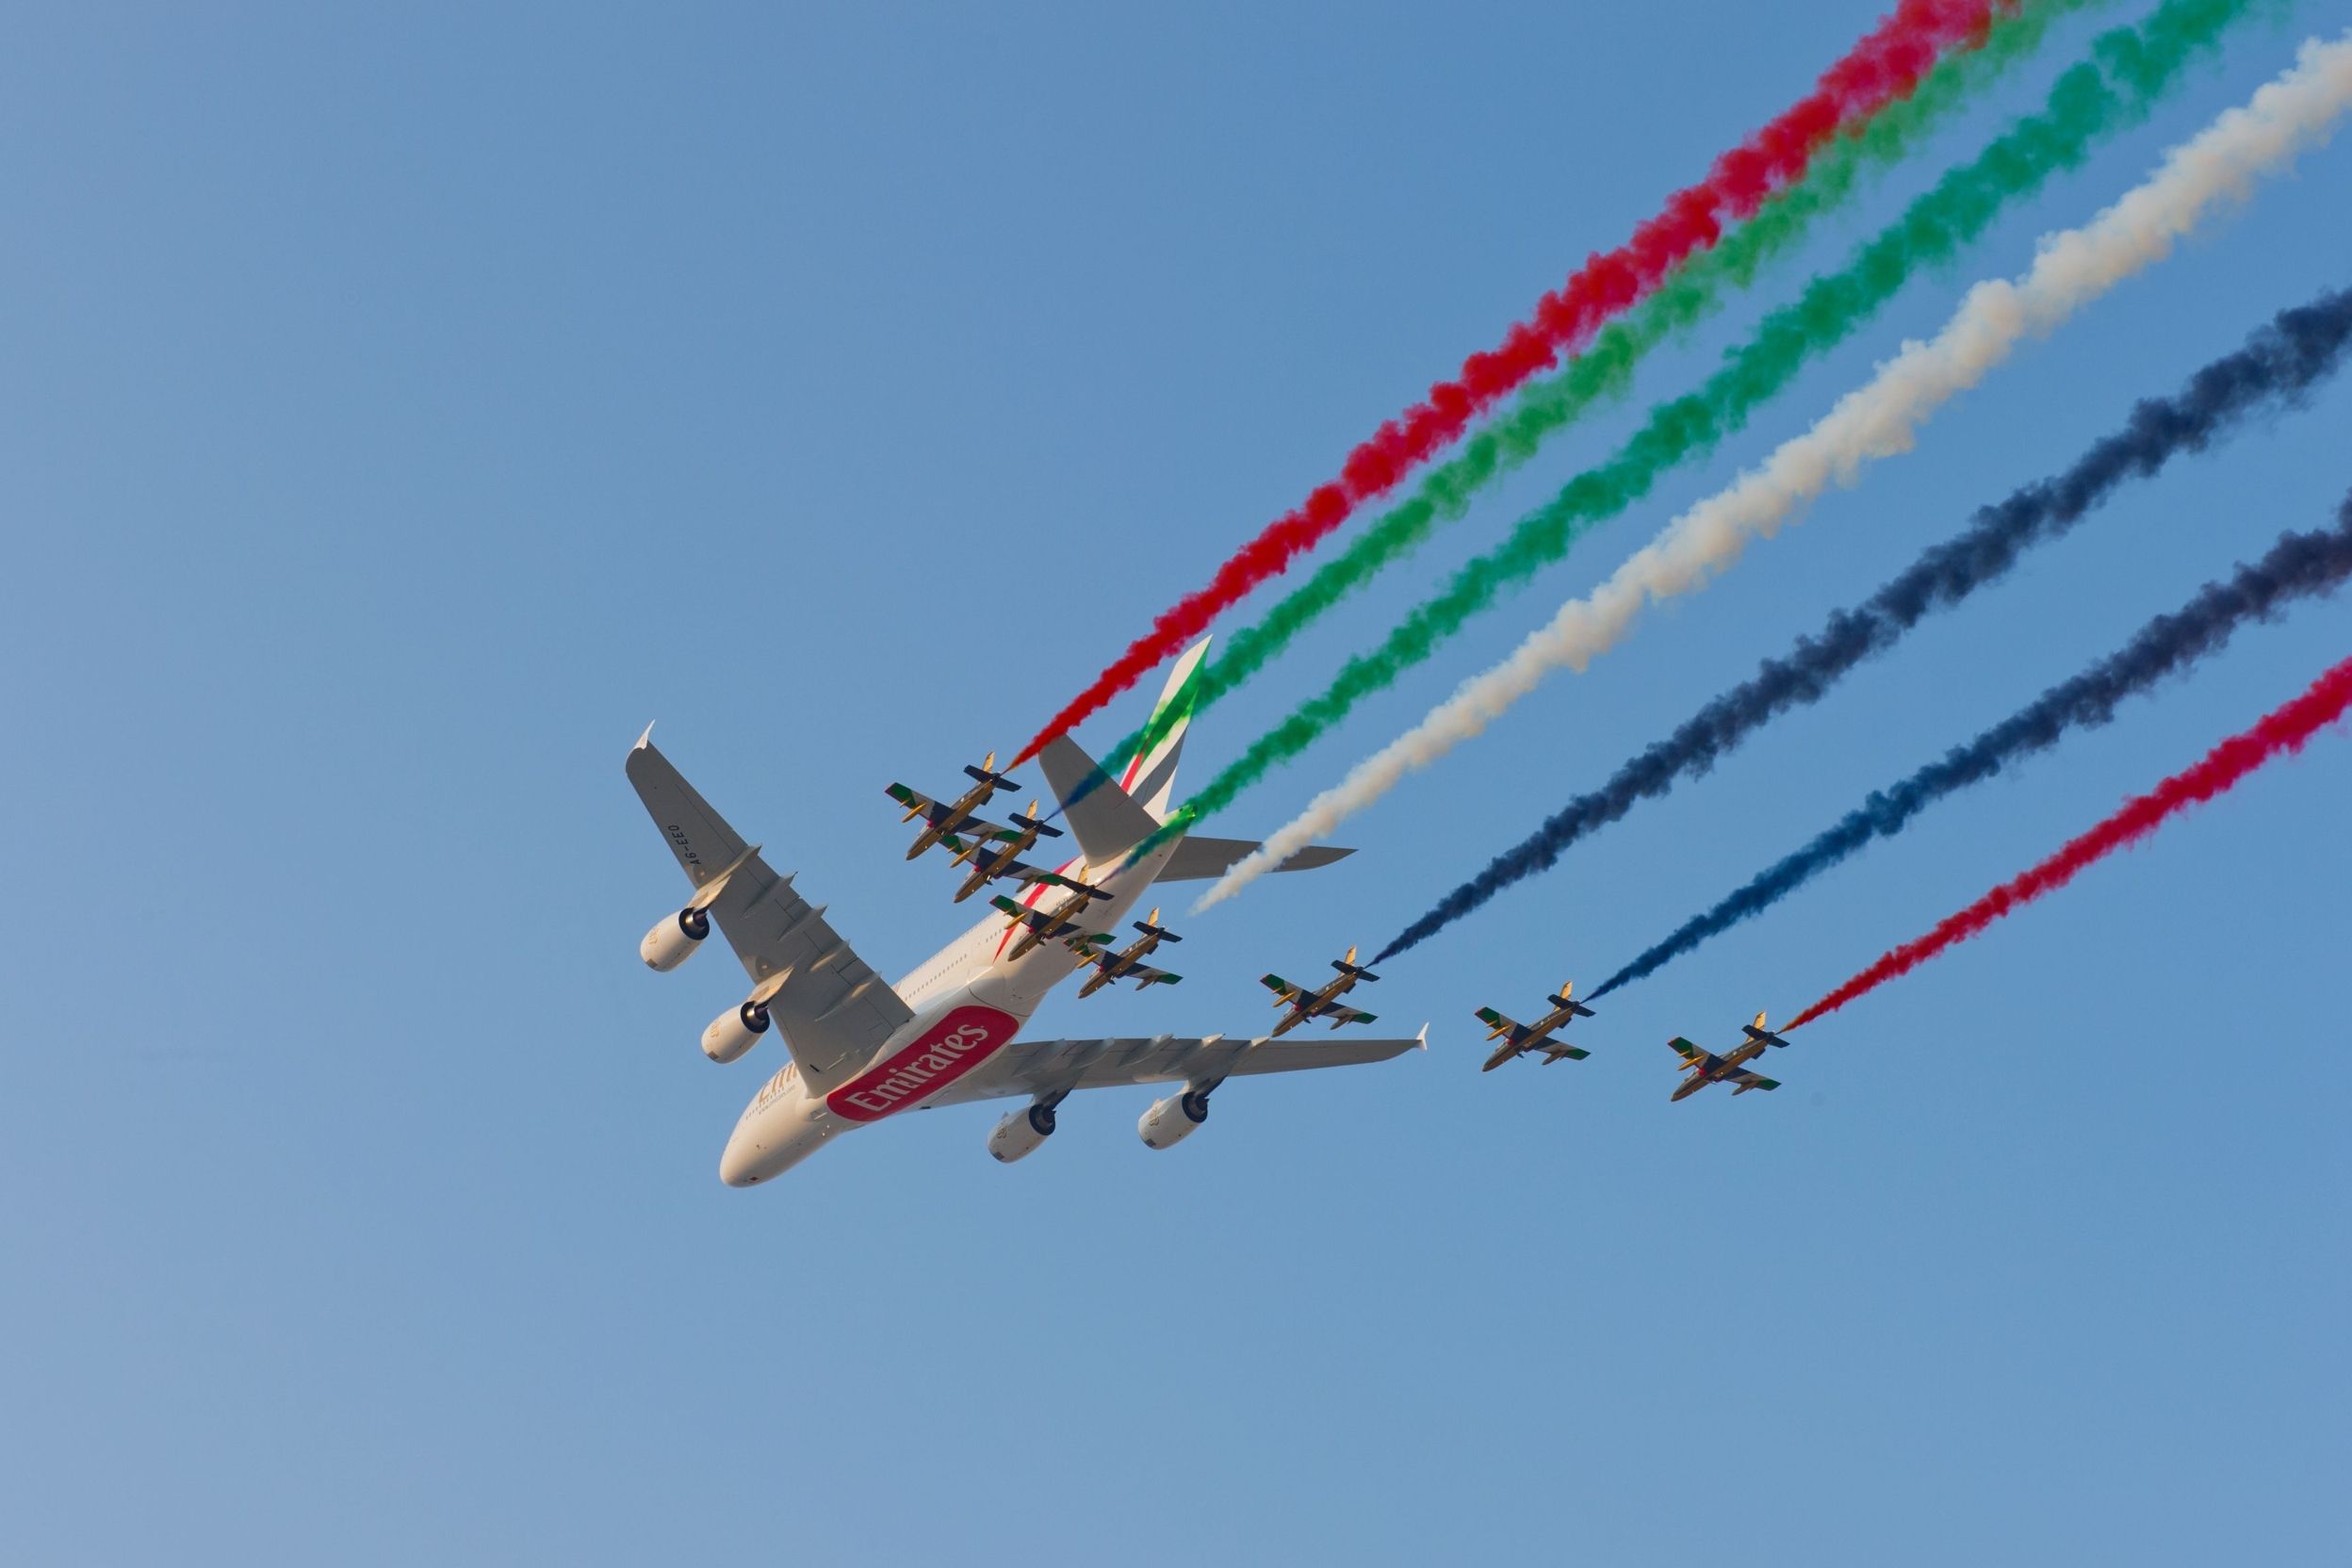 Emirates, Airbus A380, September Routes